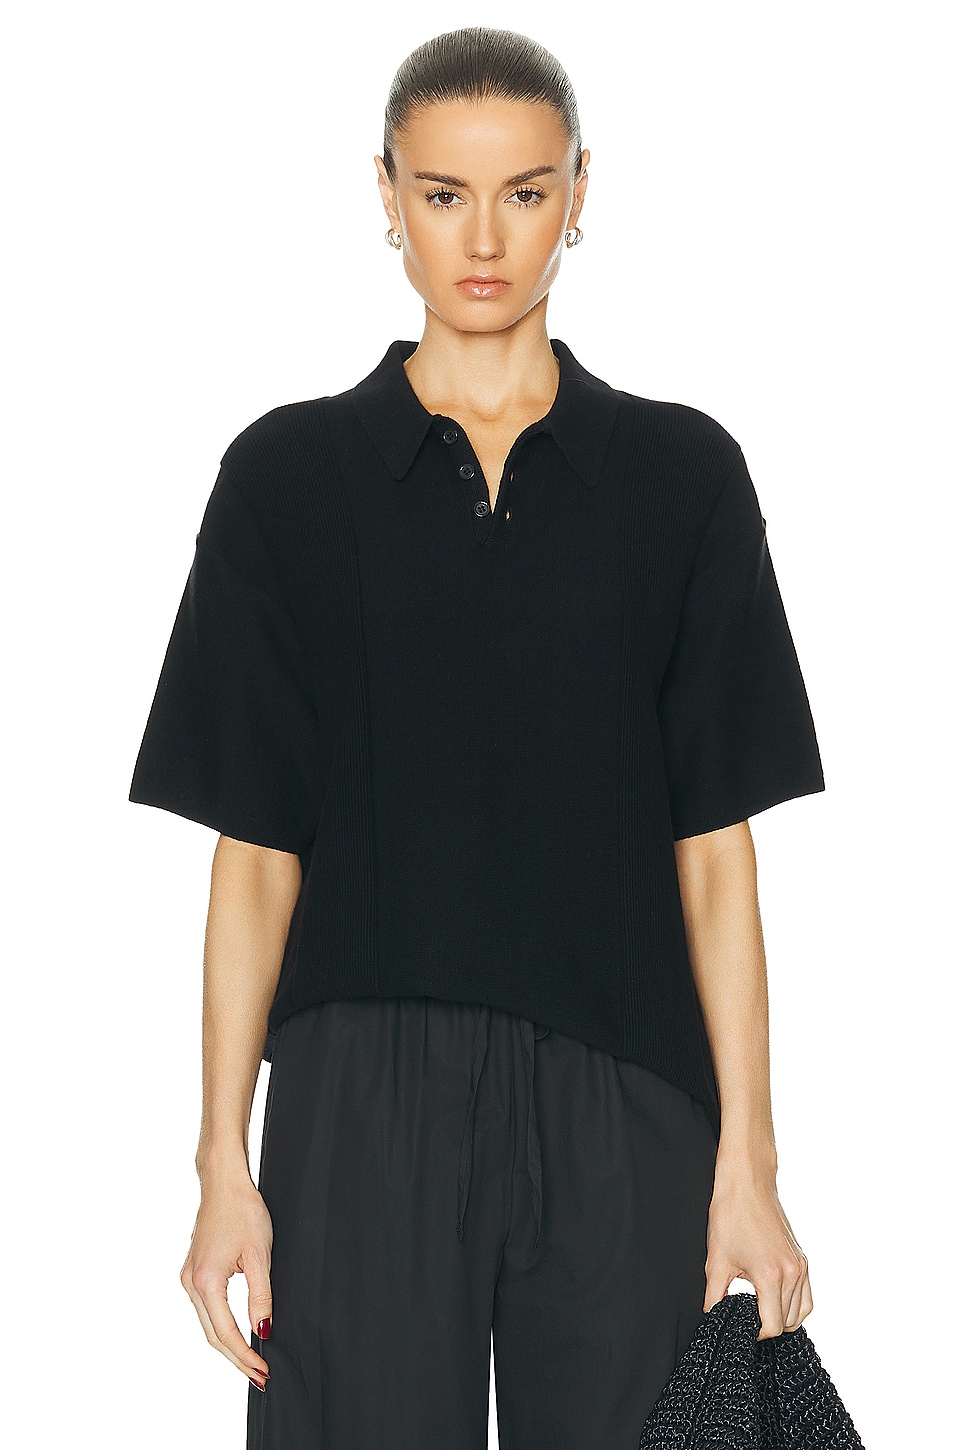 Image 1 of WAO Short Sleeve Knit Polo in Black